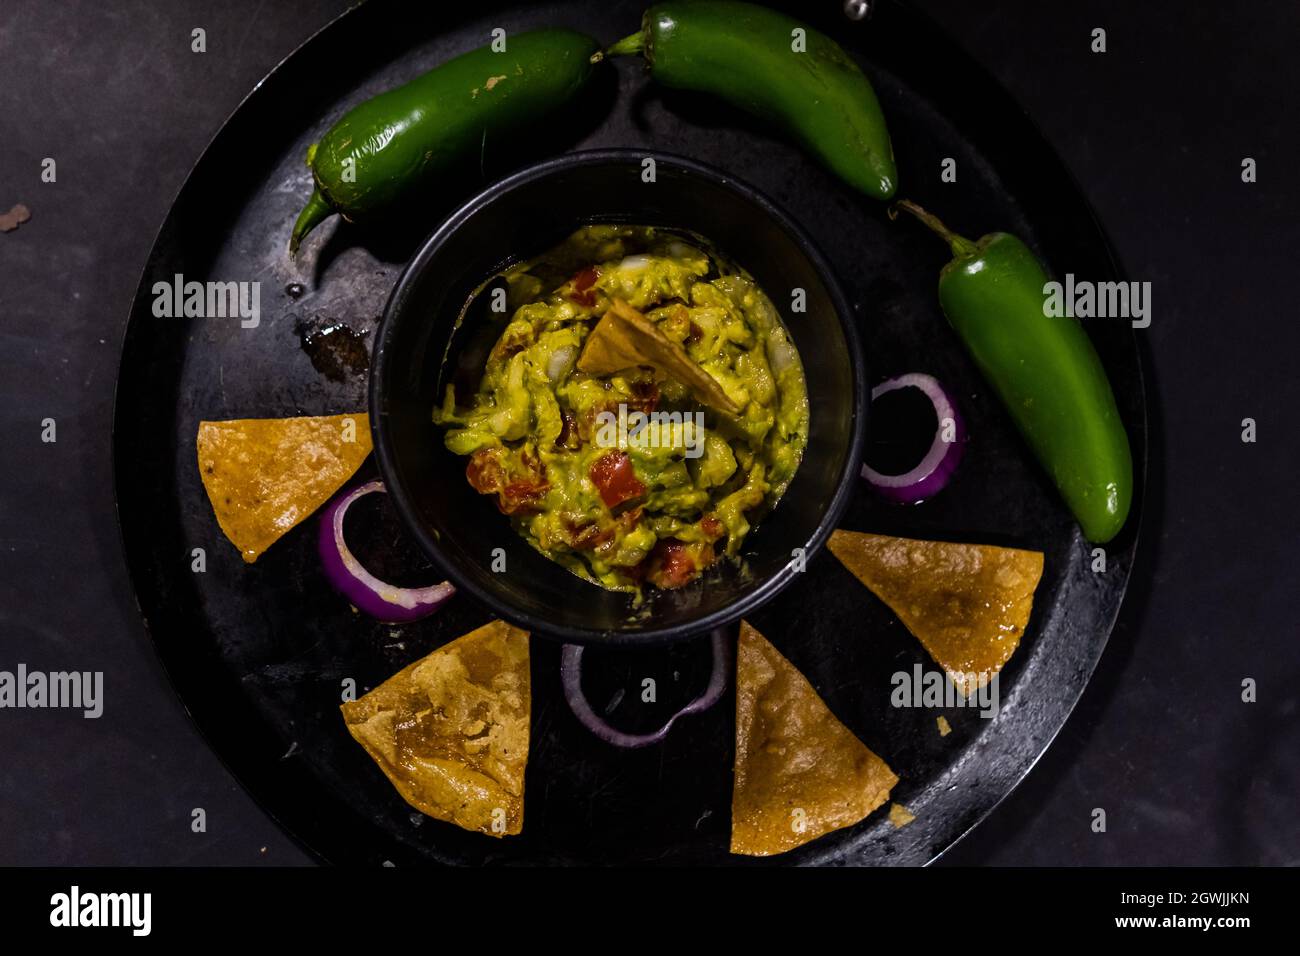 https://c8.alamy.com/comp/2GWJJKN/bowl-of-guacamole-on-mexican-comal-decorated-with-tortilla-chips-and-vegetables-2GWJJKN.jpg